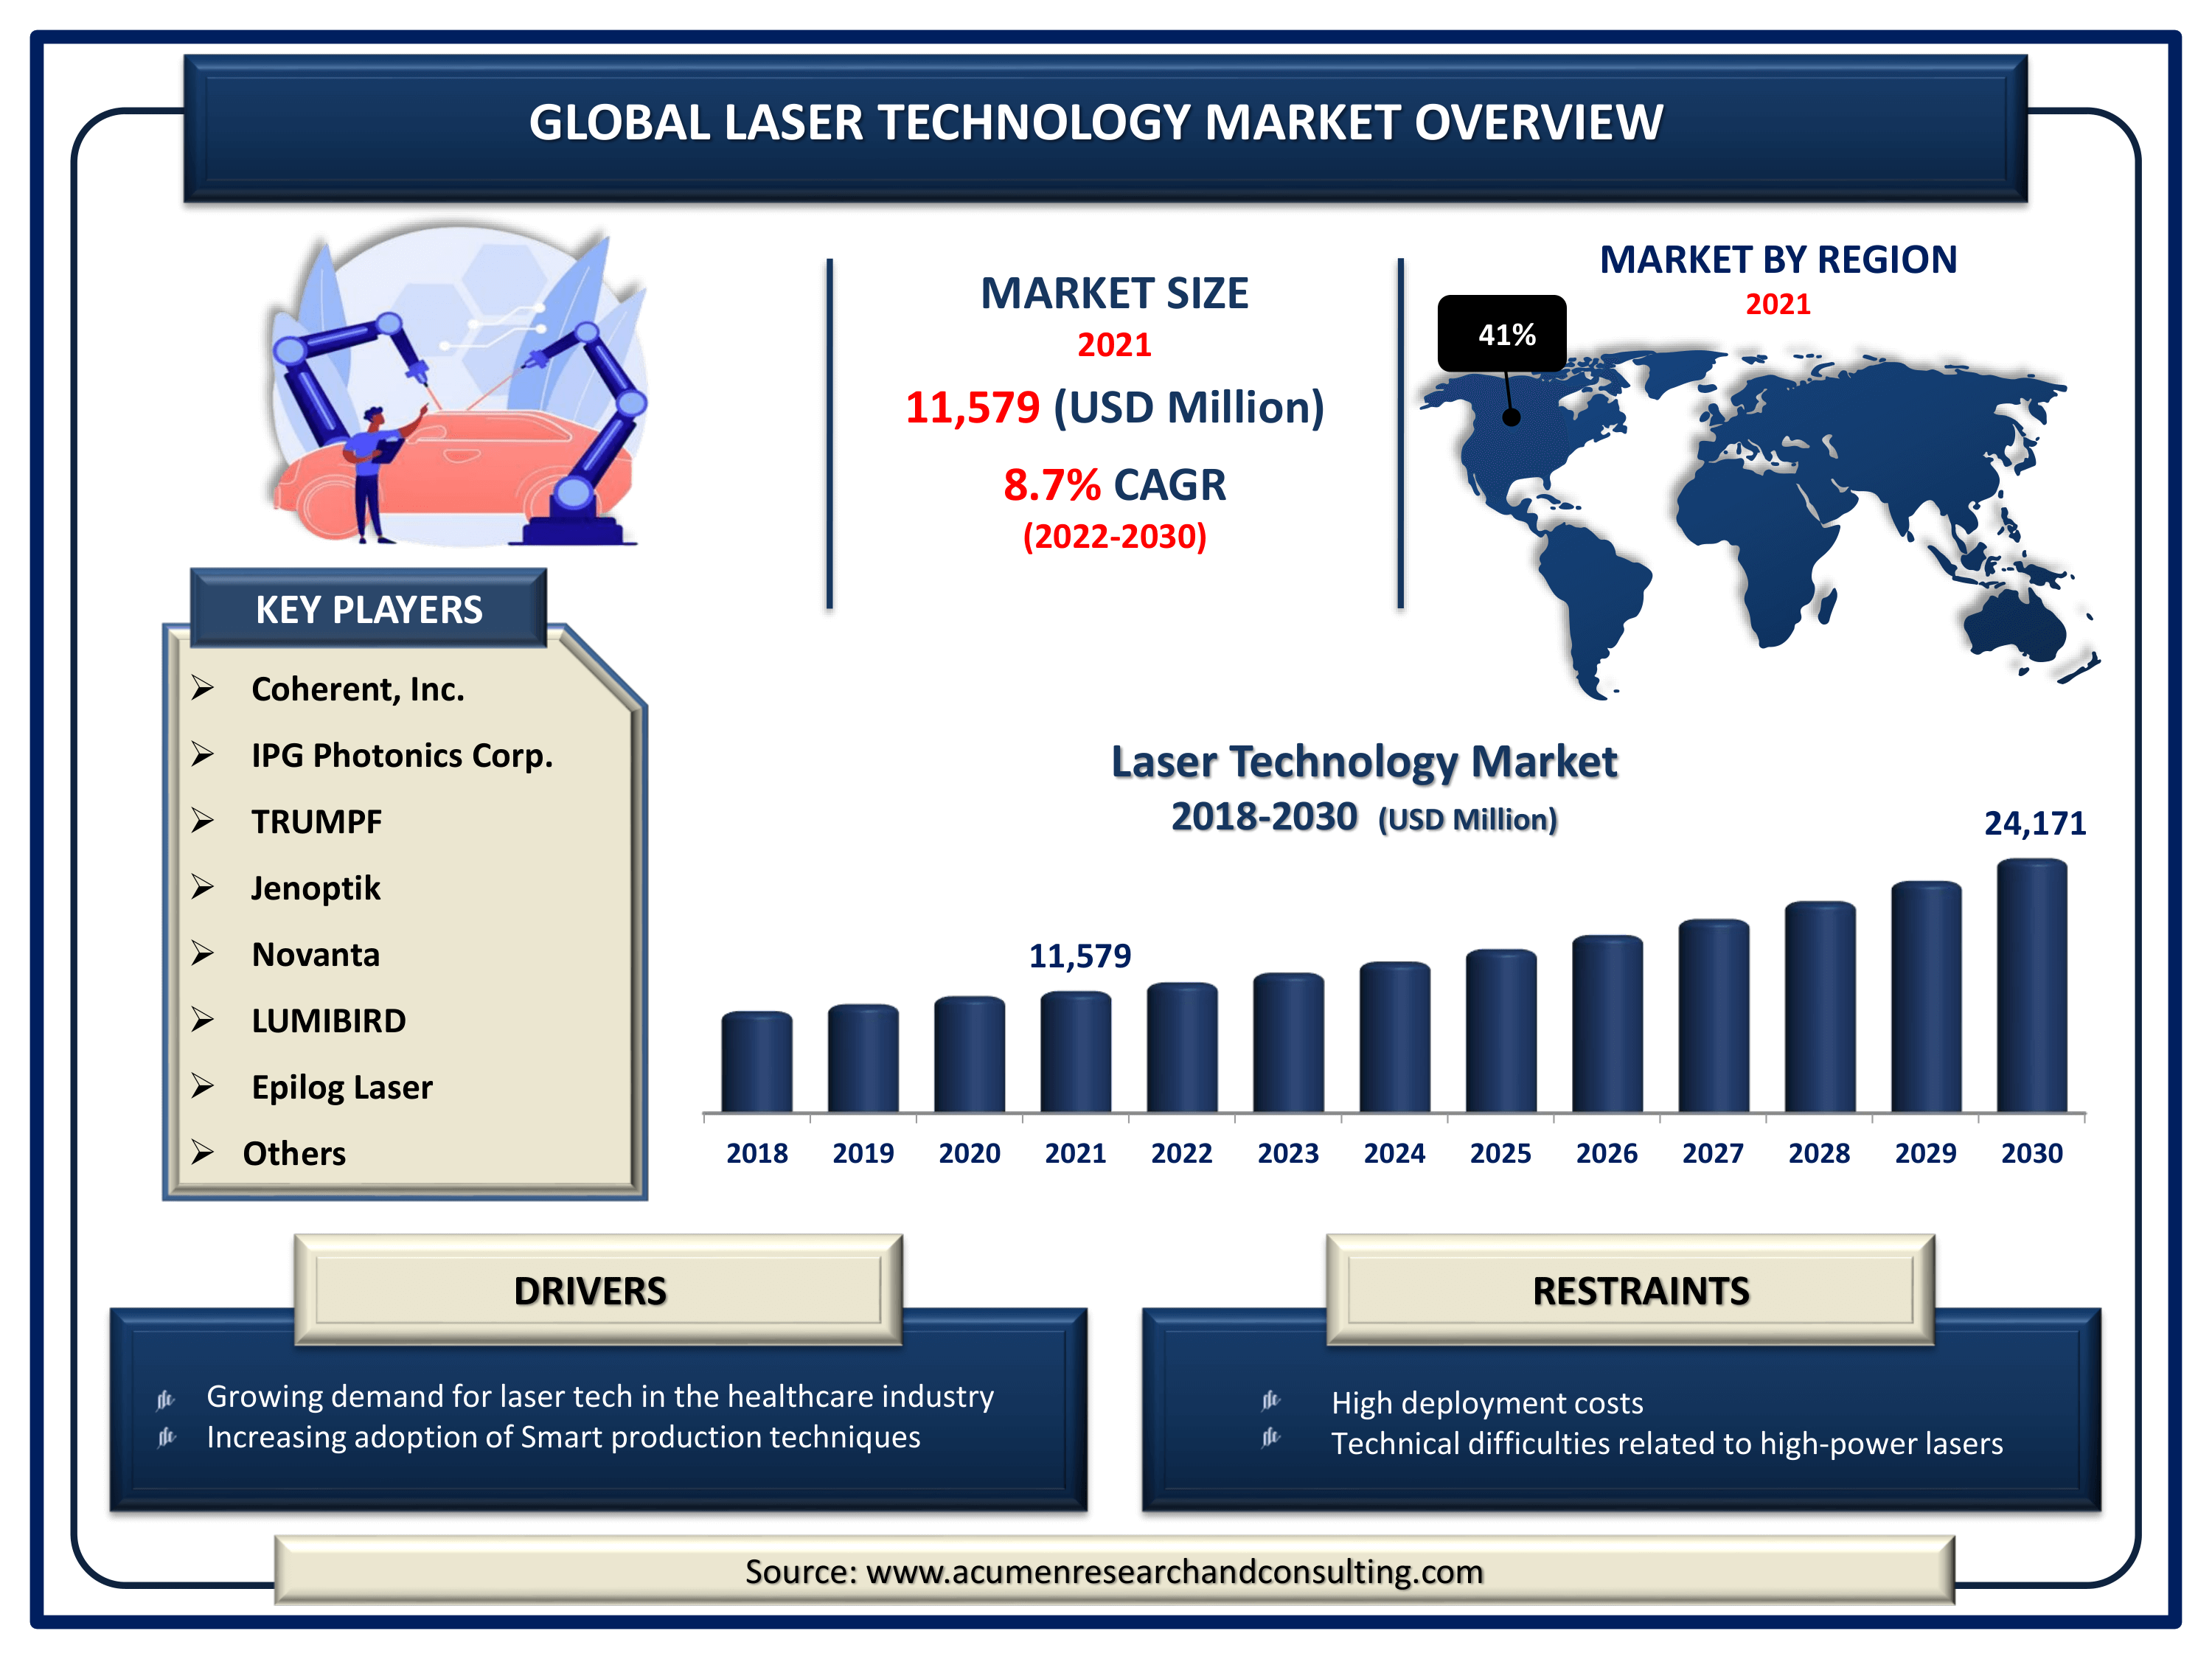 Global laser technology market revenue intended to gain USD 24,171 million by 2030 with a CAGR of 8.7% from 2022 to 2030